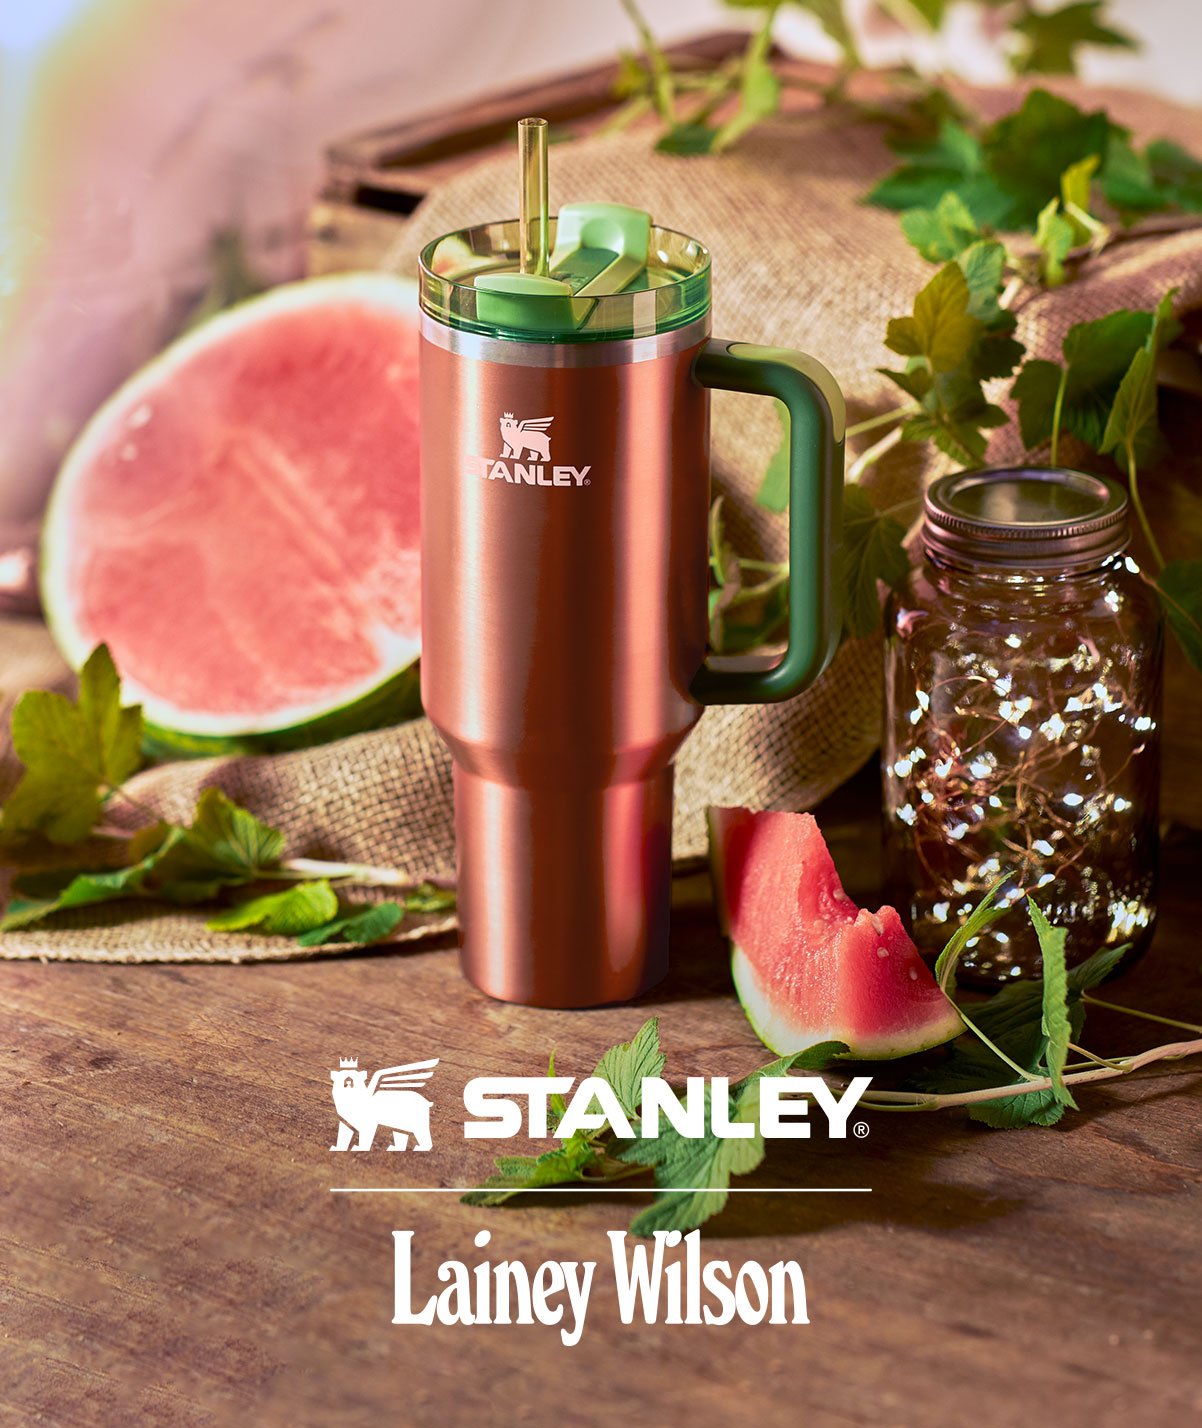 Lainey Wilson surprises with 'Country Gold' Stanley Tumbler